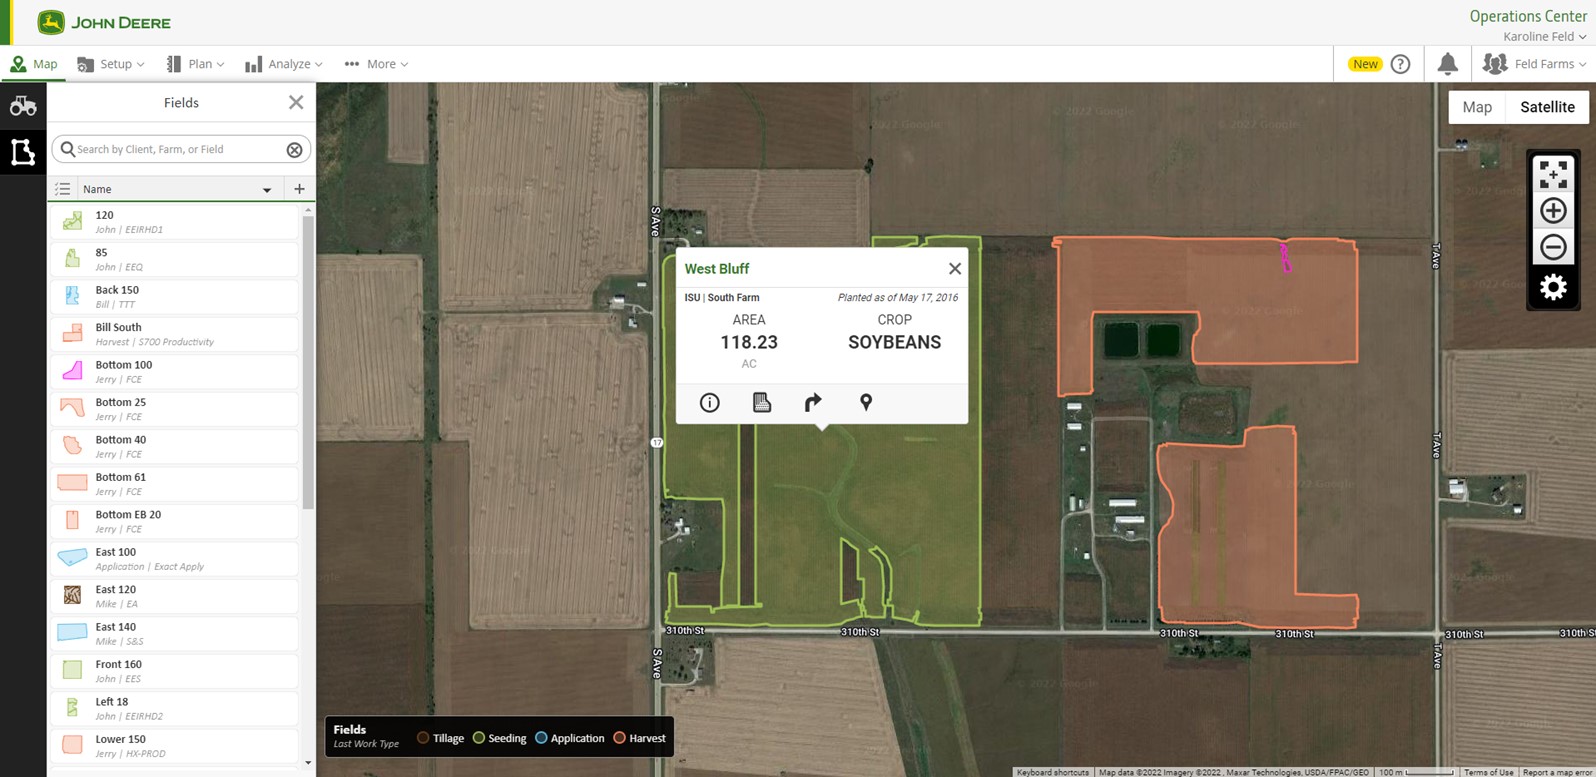 Use John Deere Operations Center to track operations on your farm.